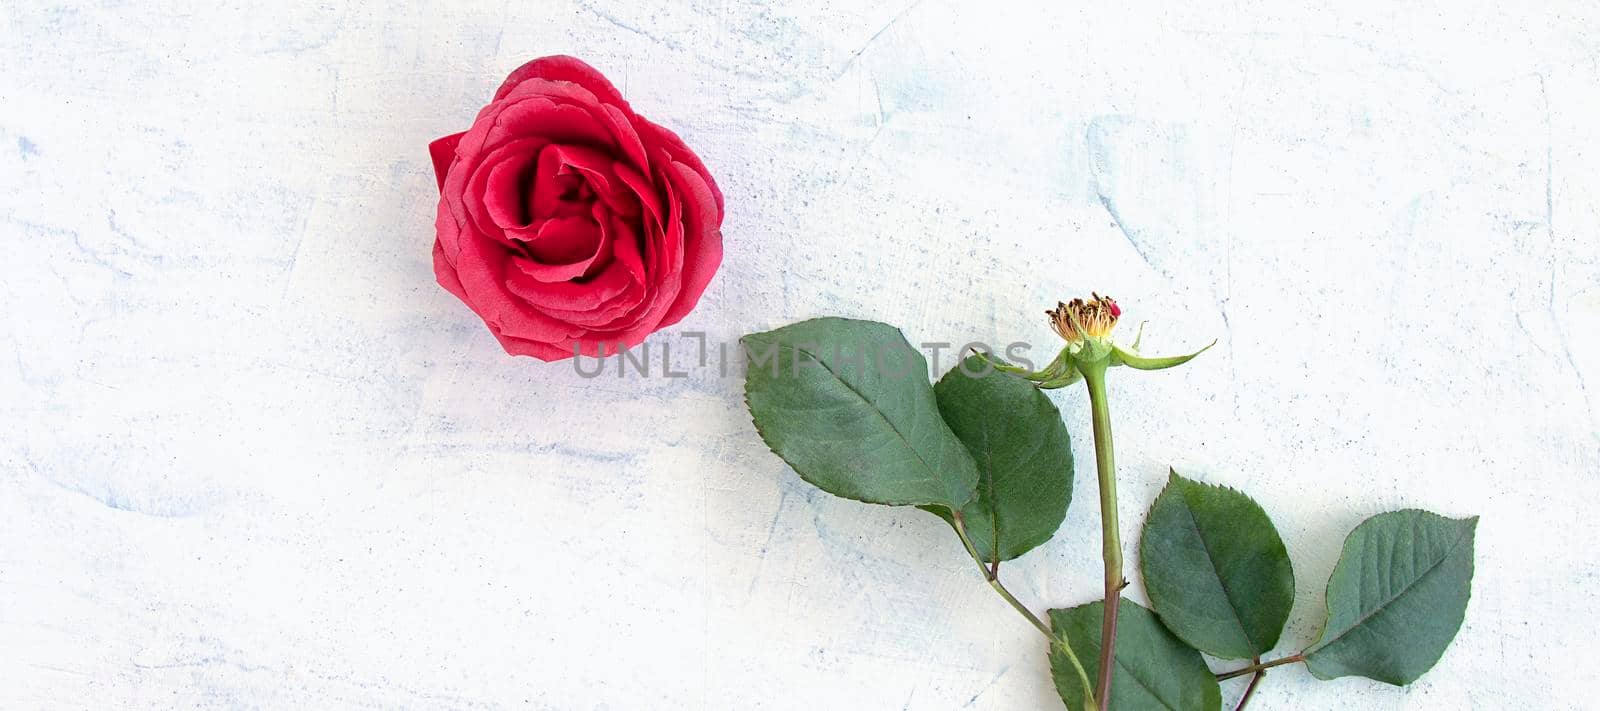 banner with scarlet rose with green leaves. rose petals of bud, separated from stem and leaves on textured background. top view and side view at the same time. by Leoschka